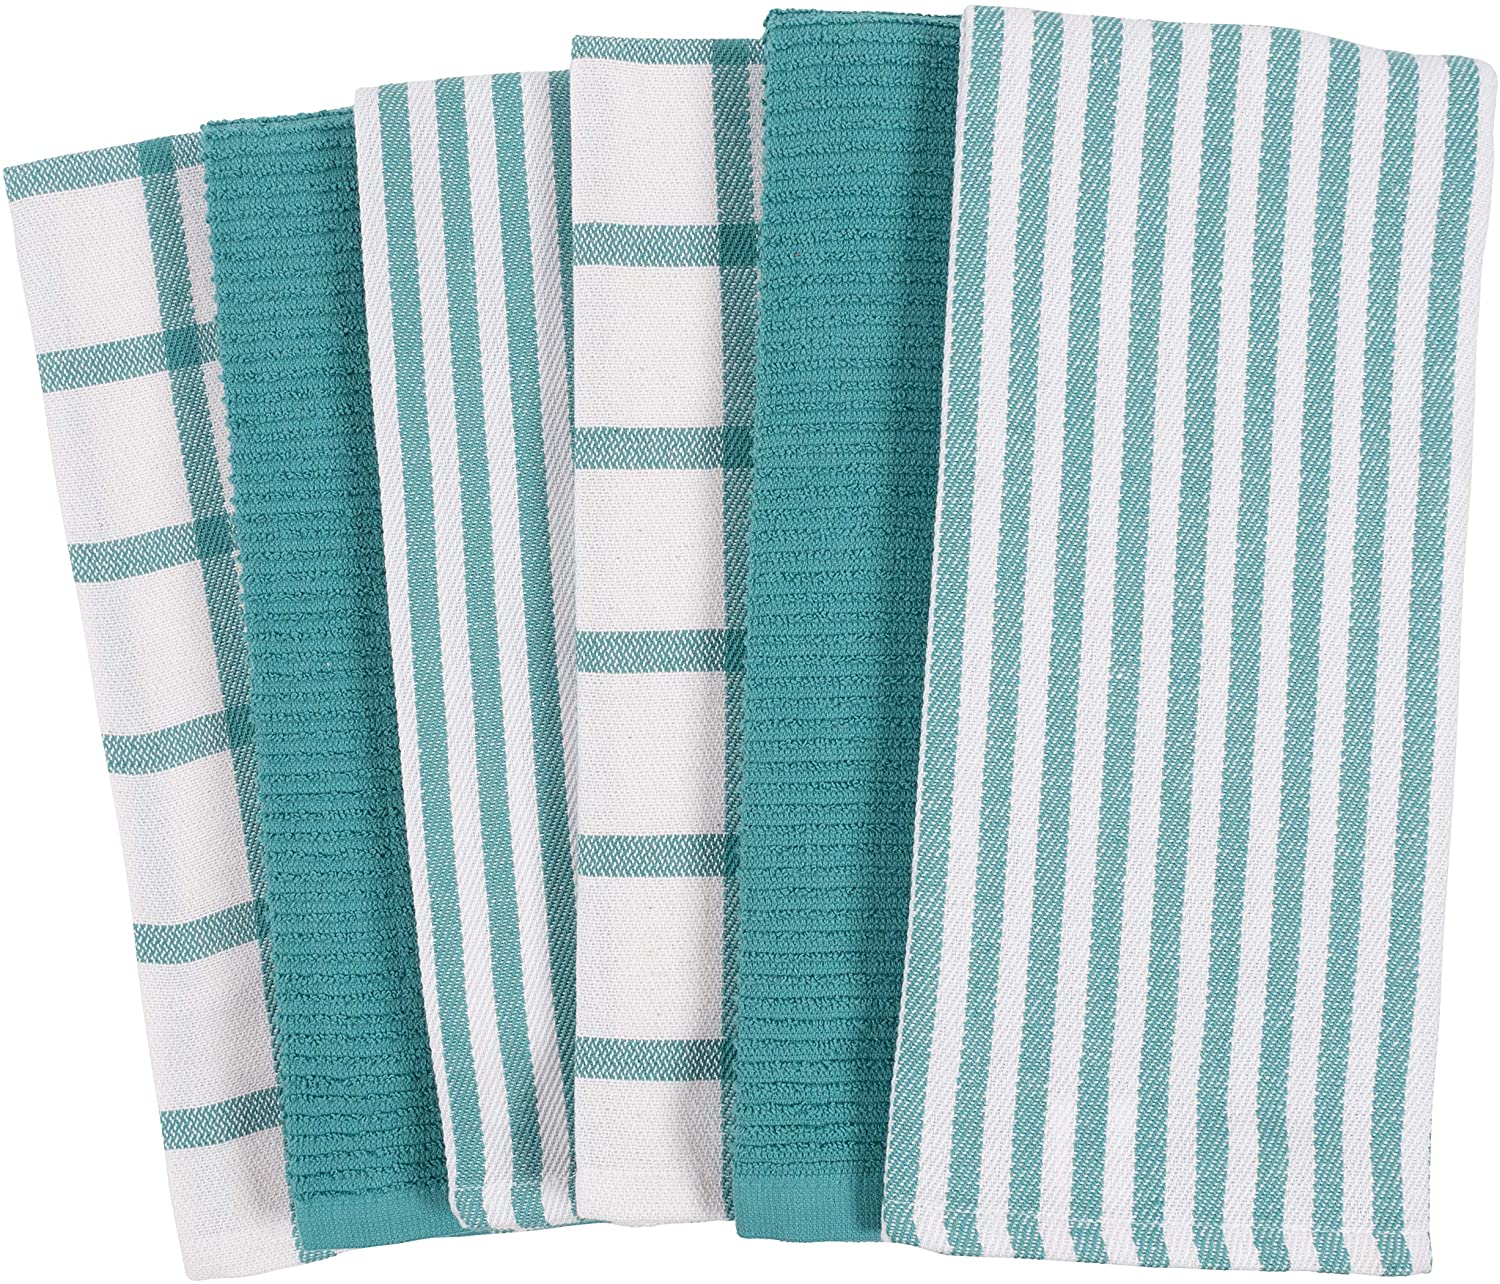 KAF Home Multi-Purpose Eco-Friendly Kitchen Towels, 6-Pack